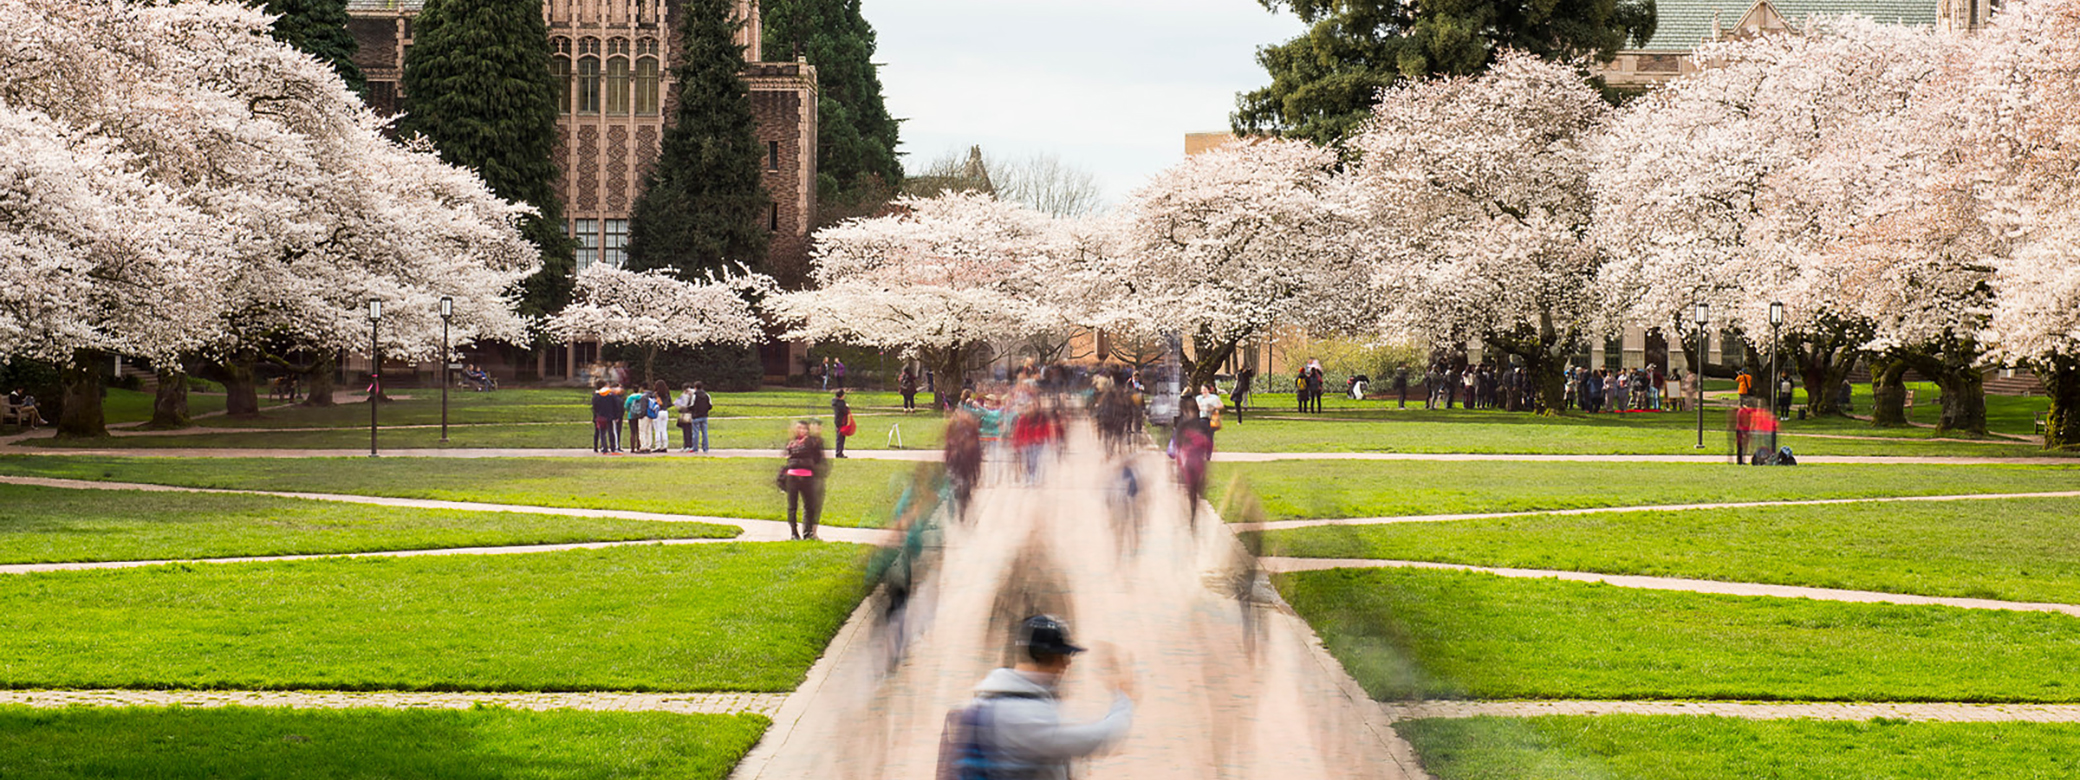 Students walking in UW quad near blooming cherry trees